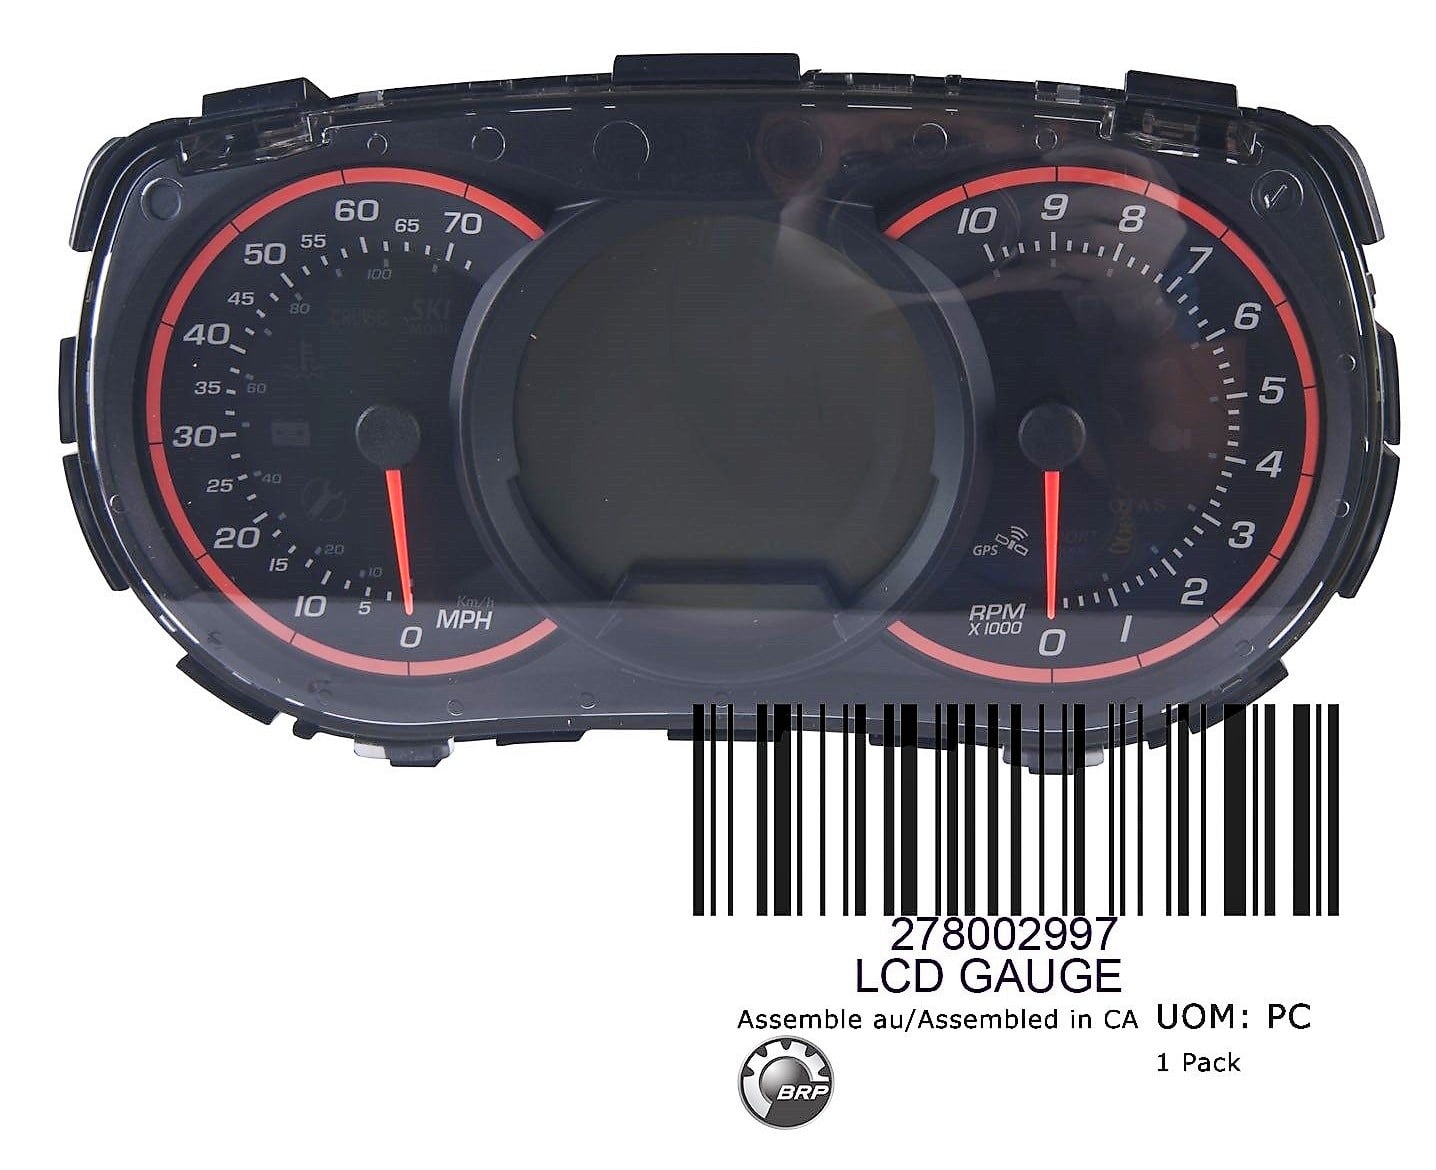 CENTRAL LCD GAUGE